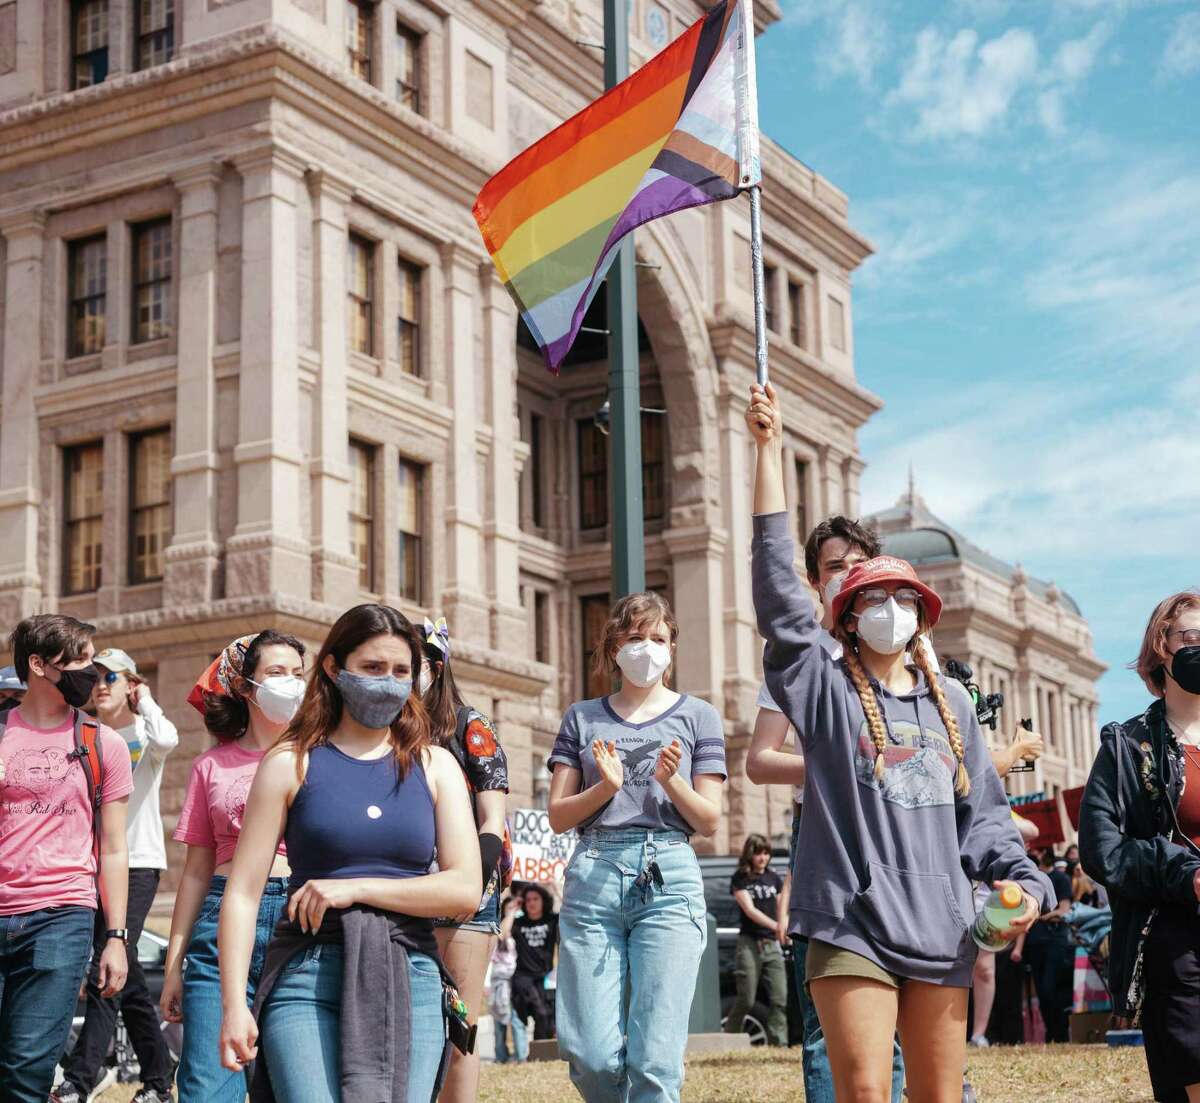 Demonstrators protest a Texas policy to regard gender-affirming treatments for transgender youth as ?’child abuse,?“ at the State Capitol in Austin, Tuesday, March 1, 2022. Texas officials have already begun investigating parents of transgender adolescents for possible child abuse, according to a lawsuit filed on Tuesday. (Christopher Lee/The New York Times)